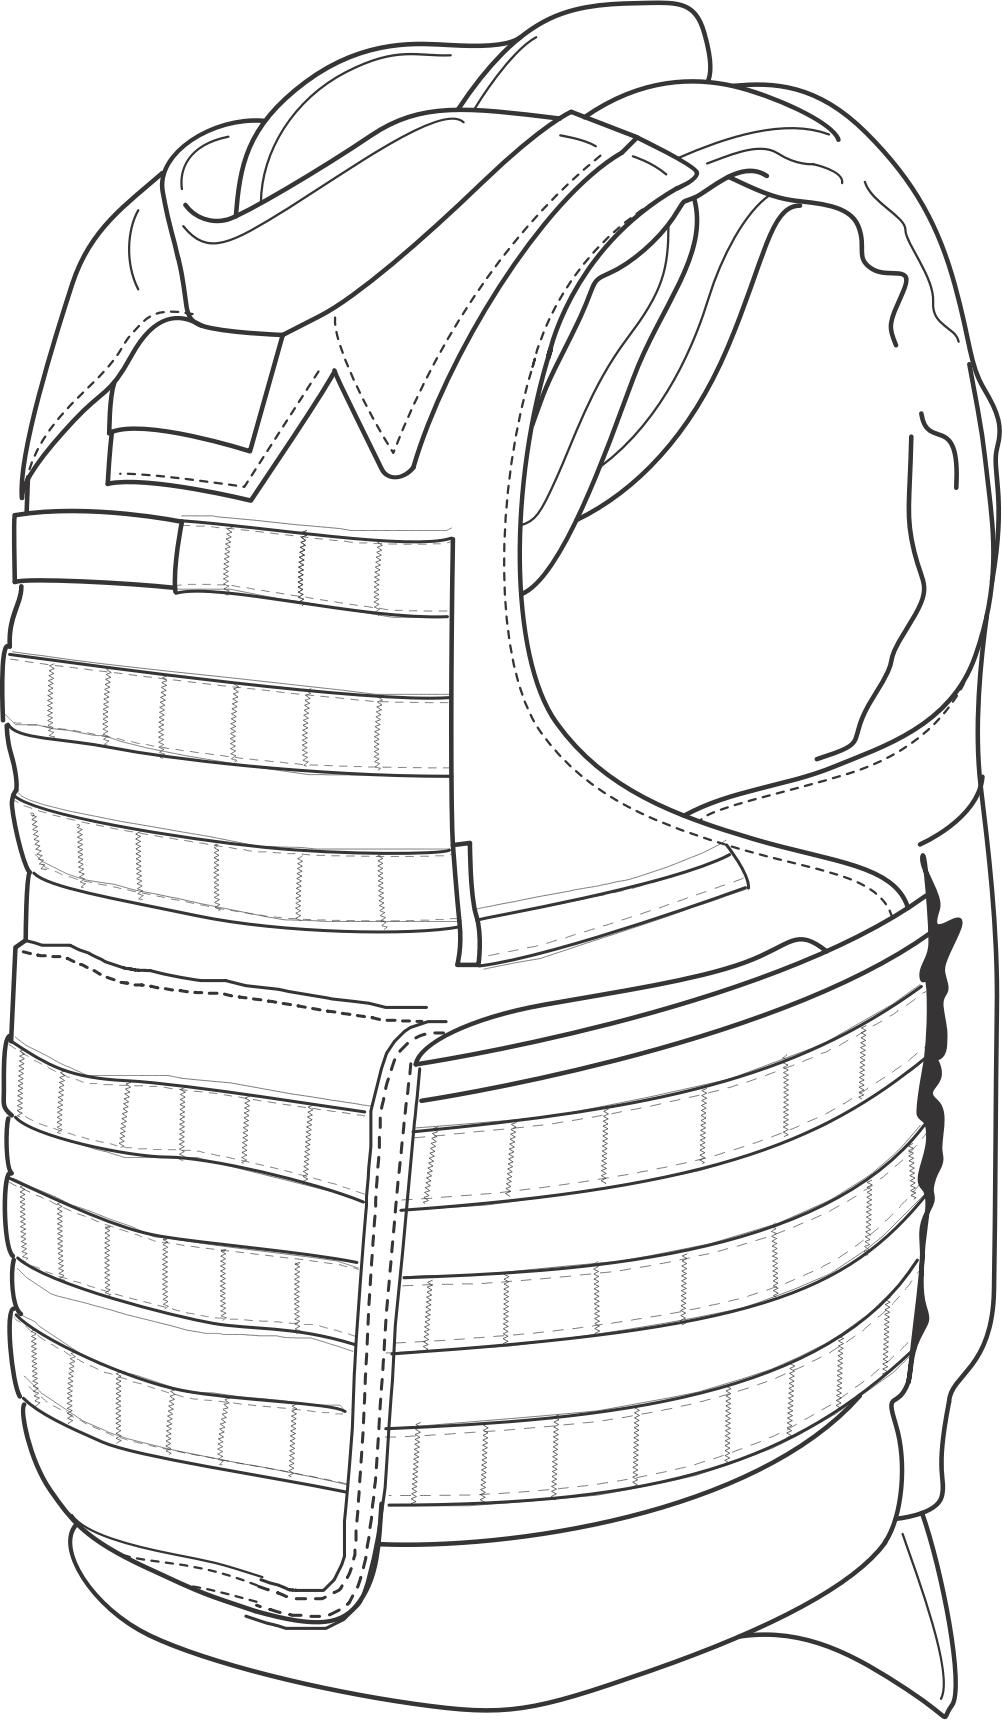 Military Armor Vest png